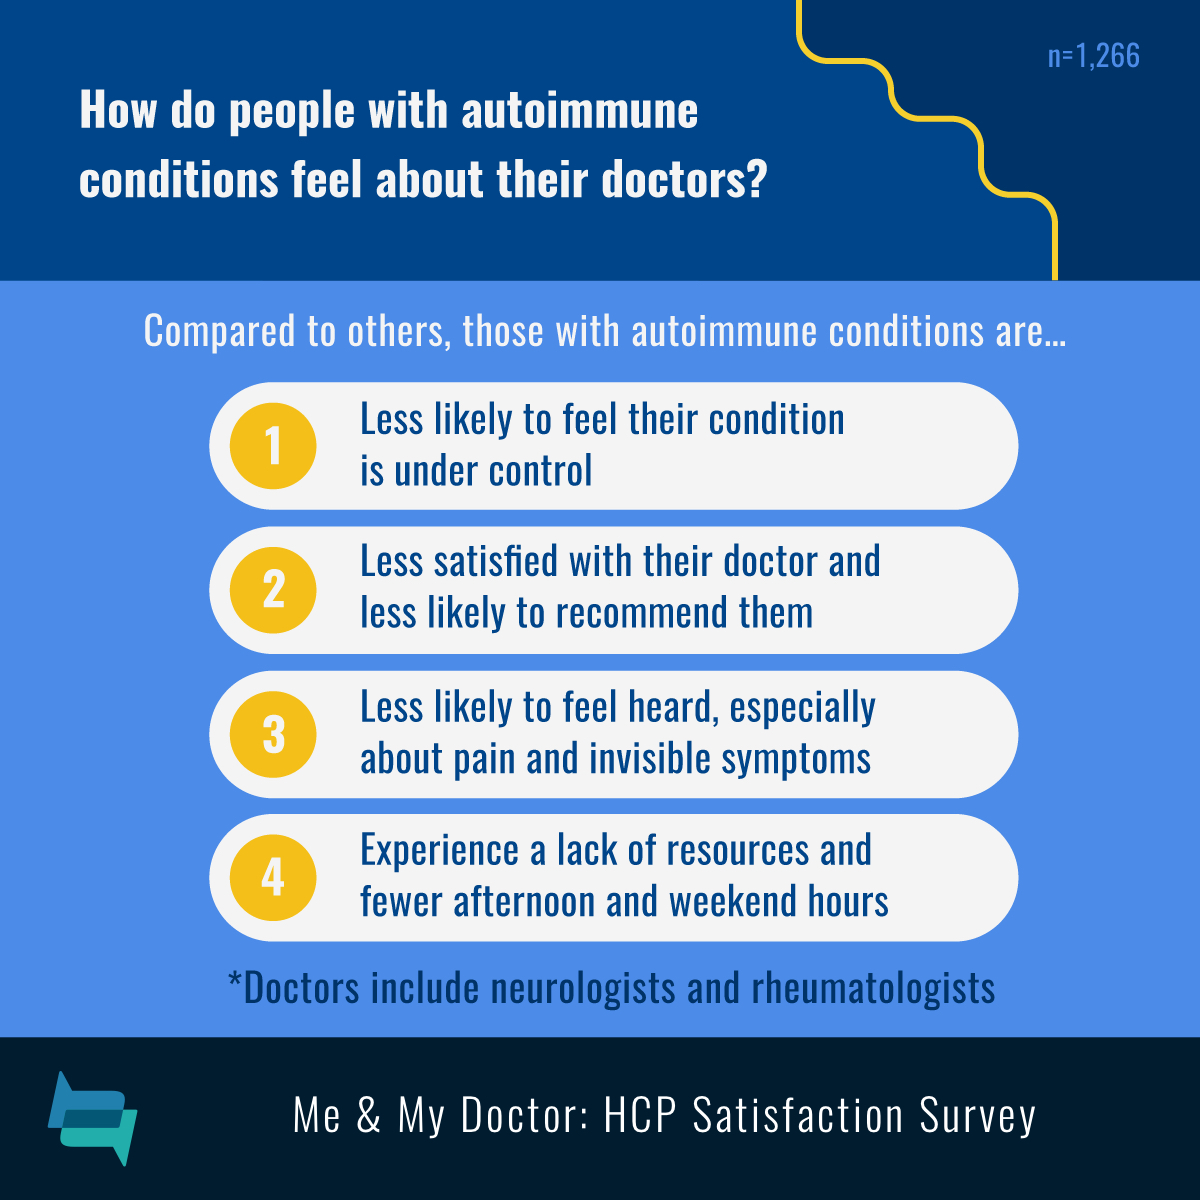 Autoimmune condition patients are less likely to feel control, have less doctor satisfaction, feel less heard and experience a lack of resources.